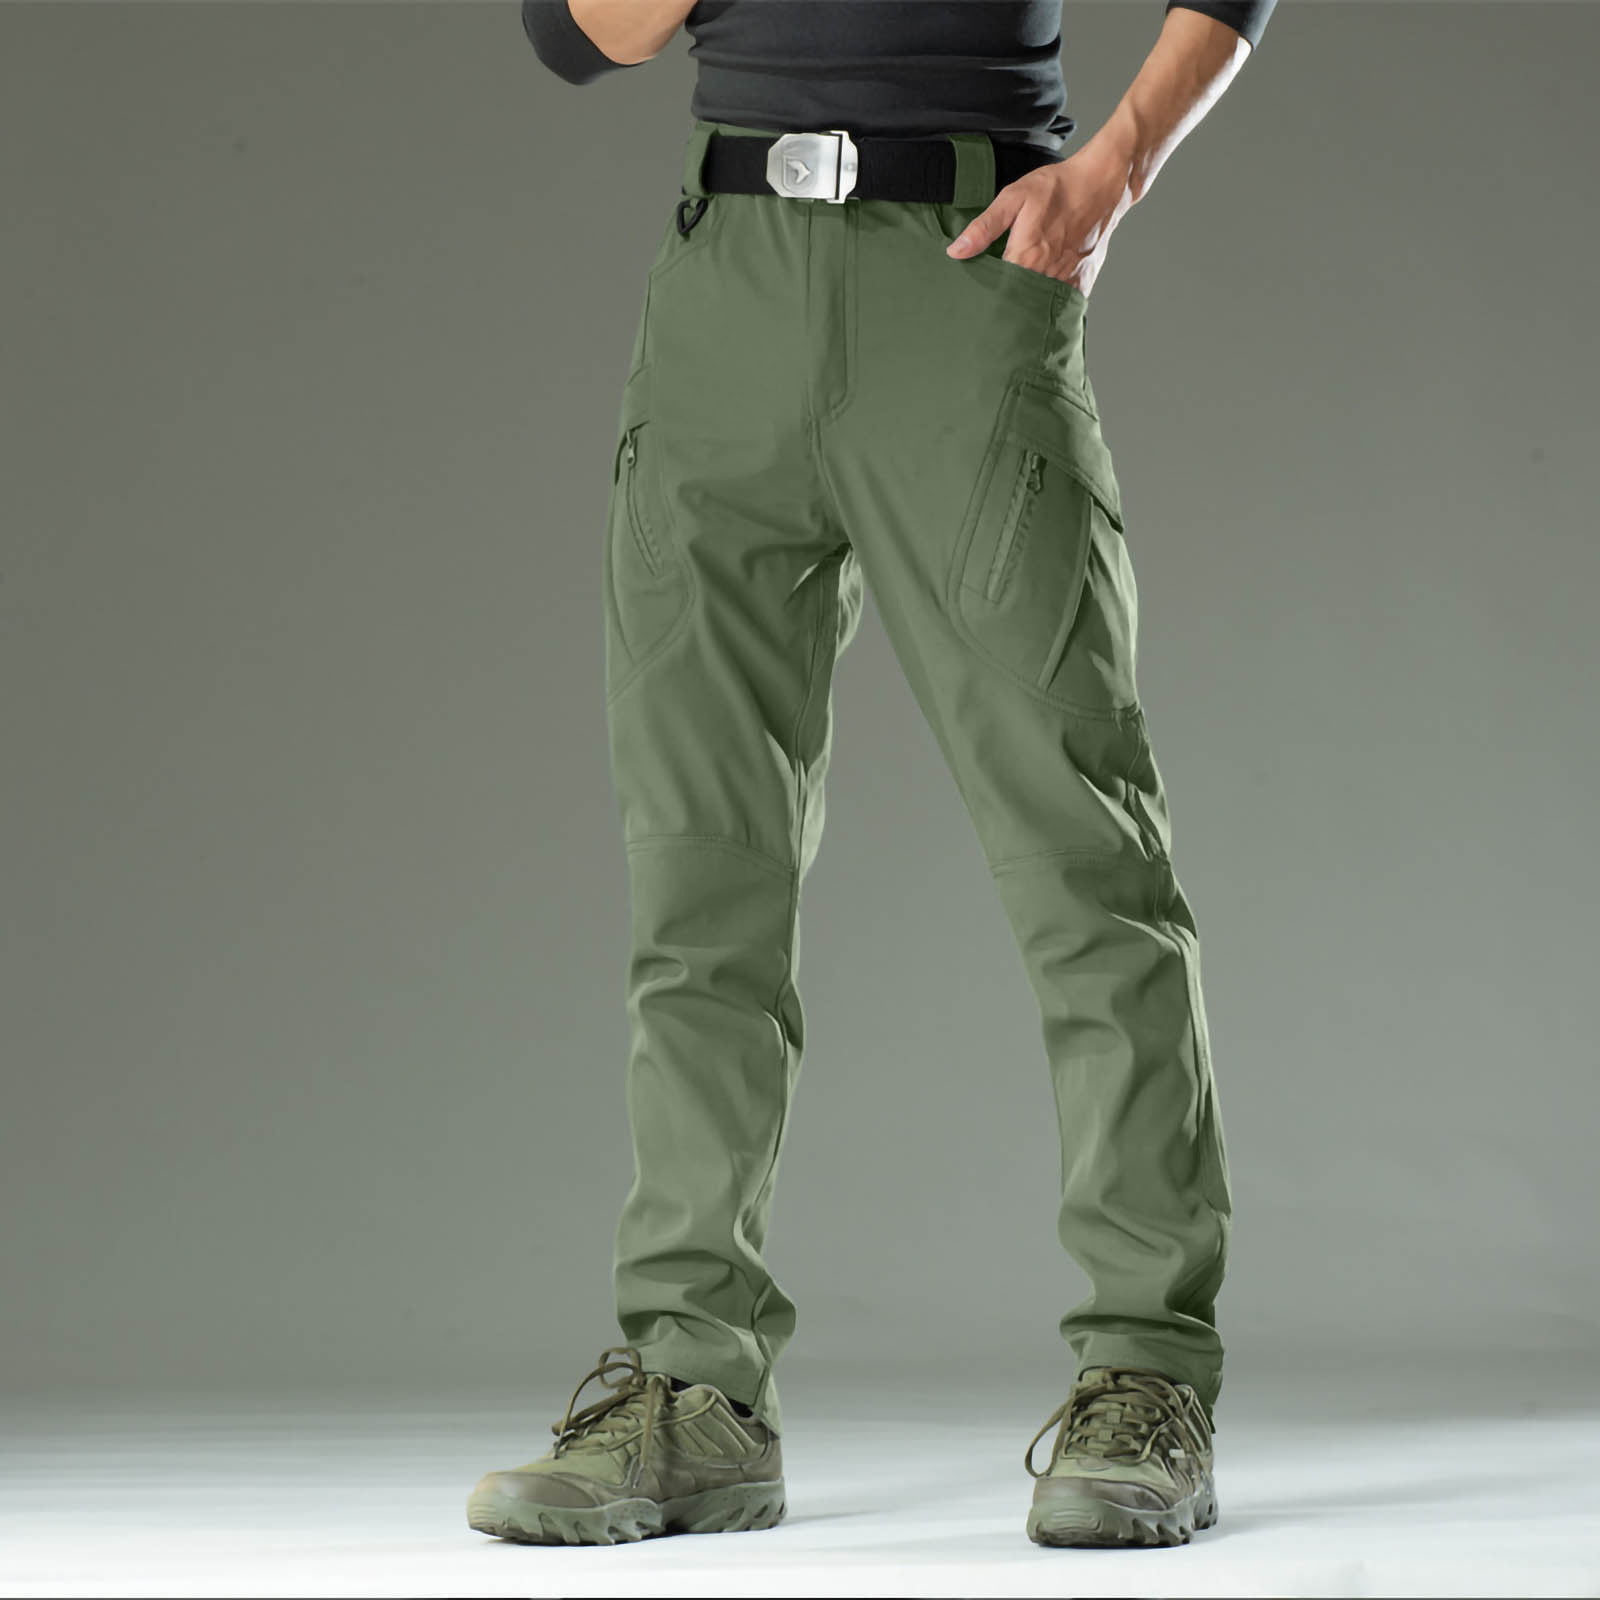 Fjallraven High Coast Hike Trousers Review  SectionHikercom